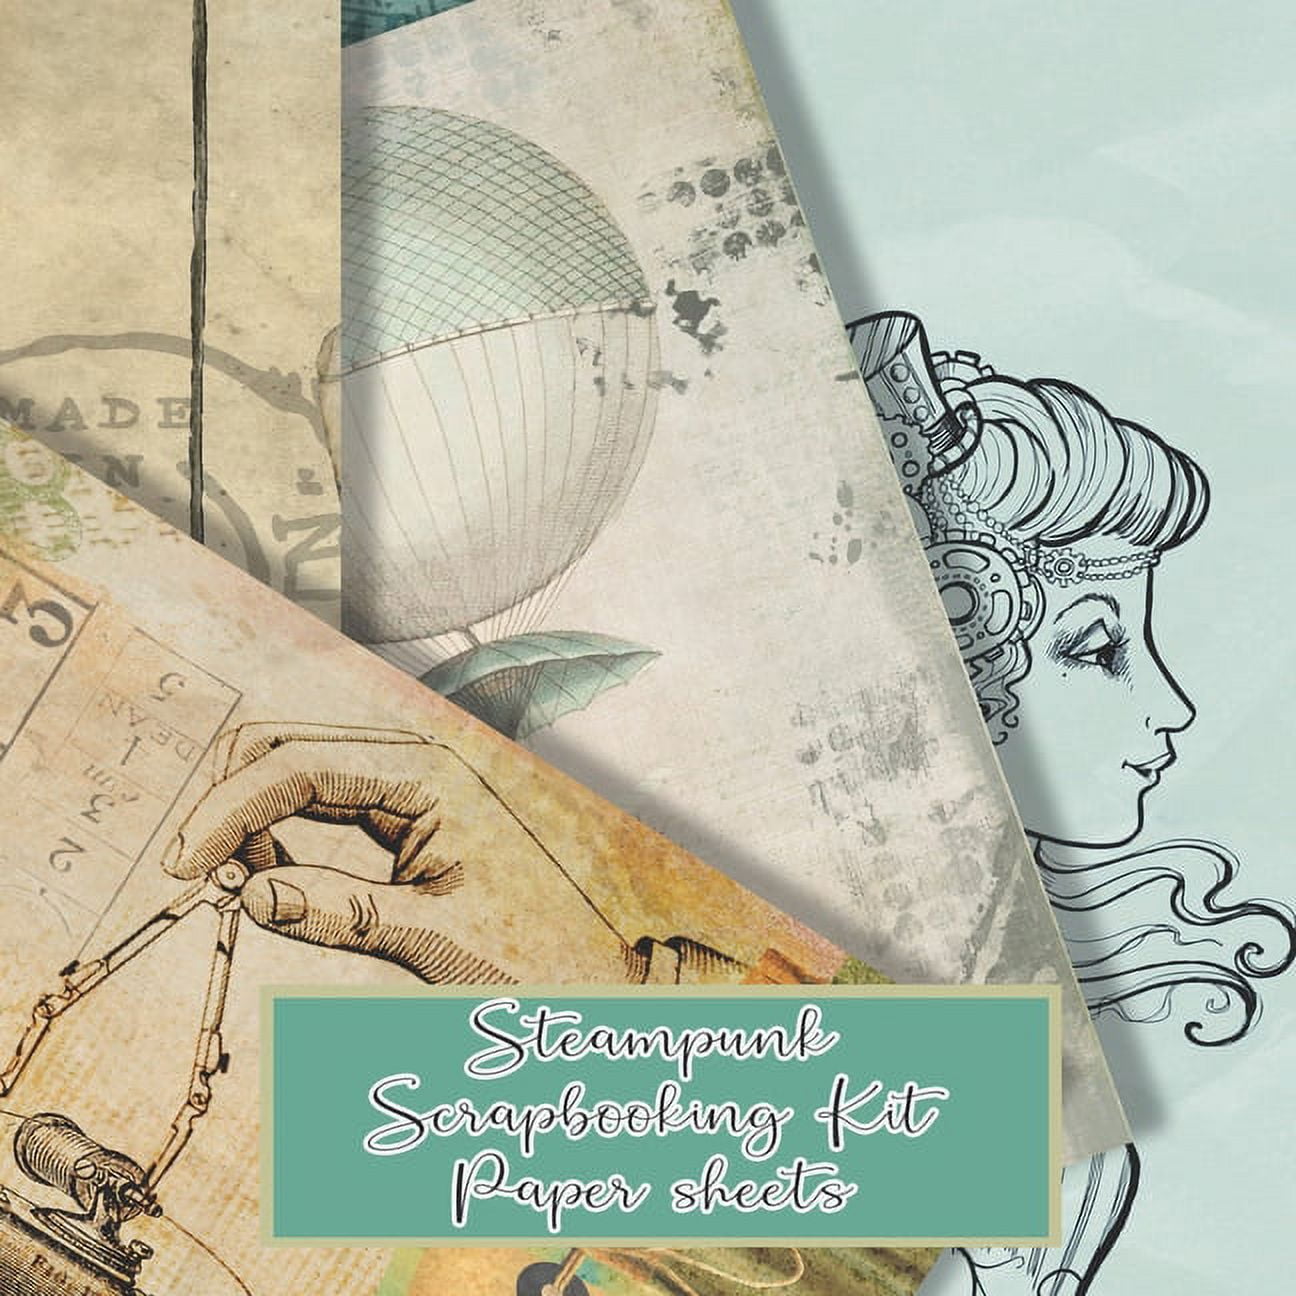 Steampunk scrapbooking kits paper sheets : Scrapbooking kit in a book for  creating your own sketchbooks - Emphera elements for decoupage, journaling,  notebooks, altered art and scrap books - Ideal for the